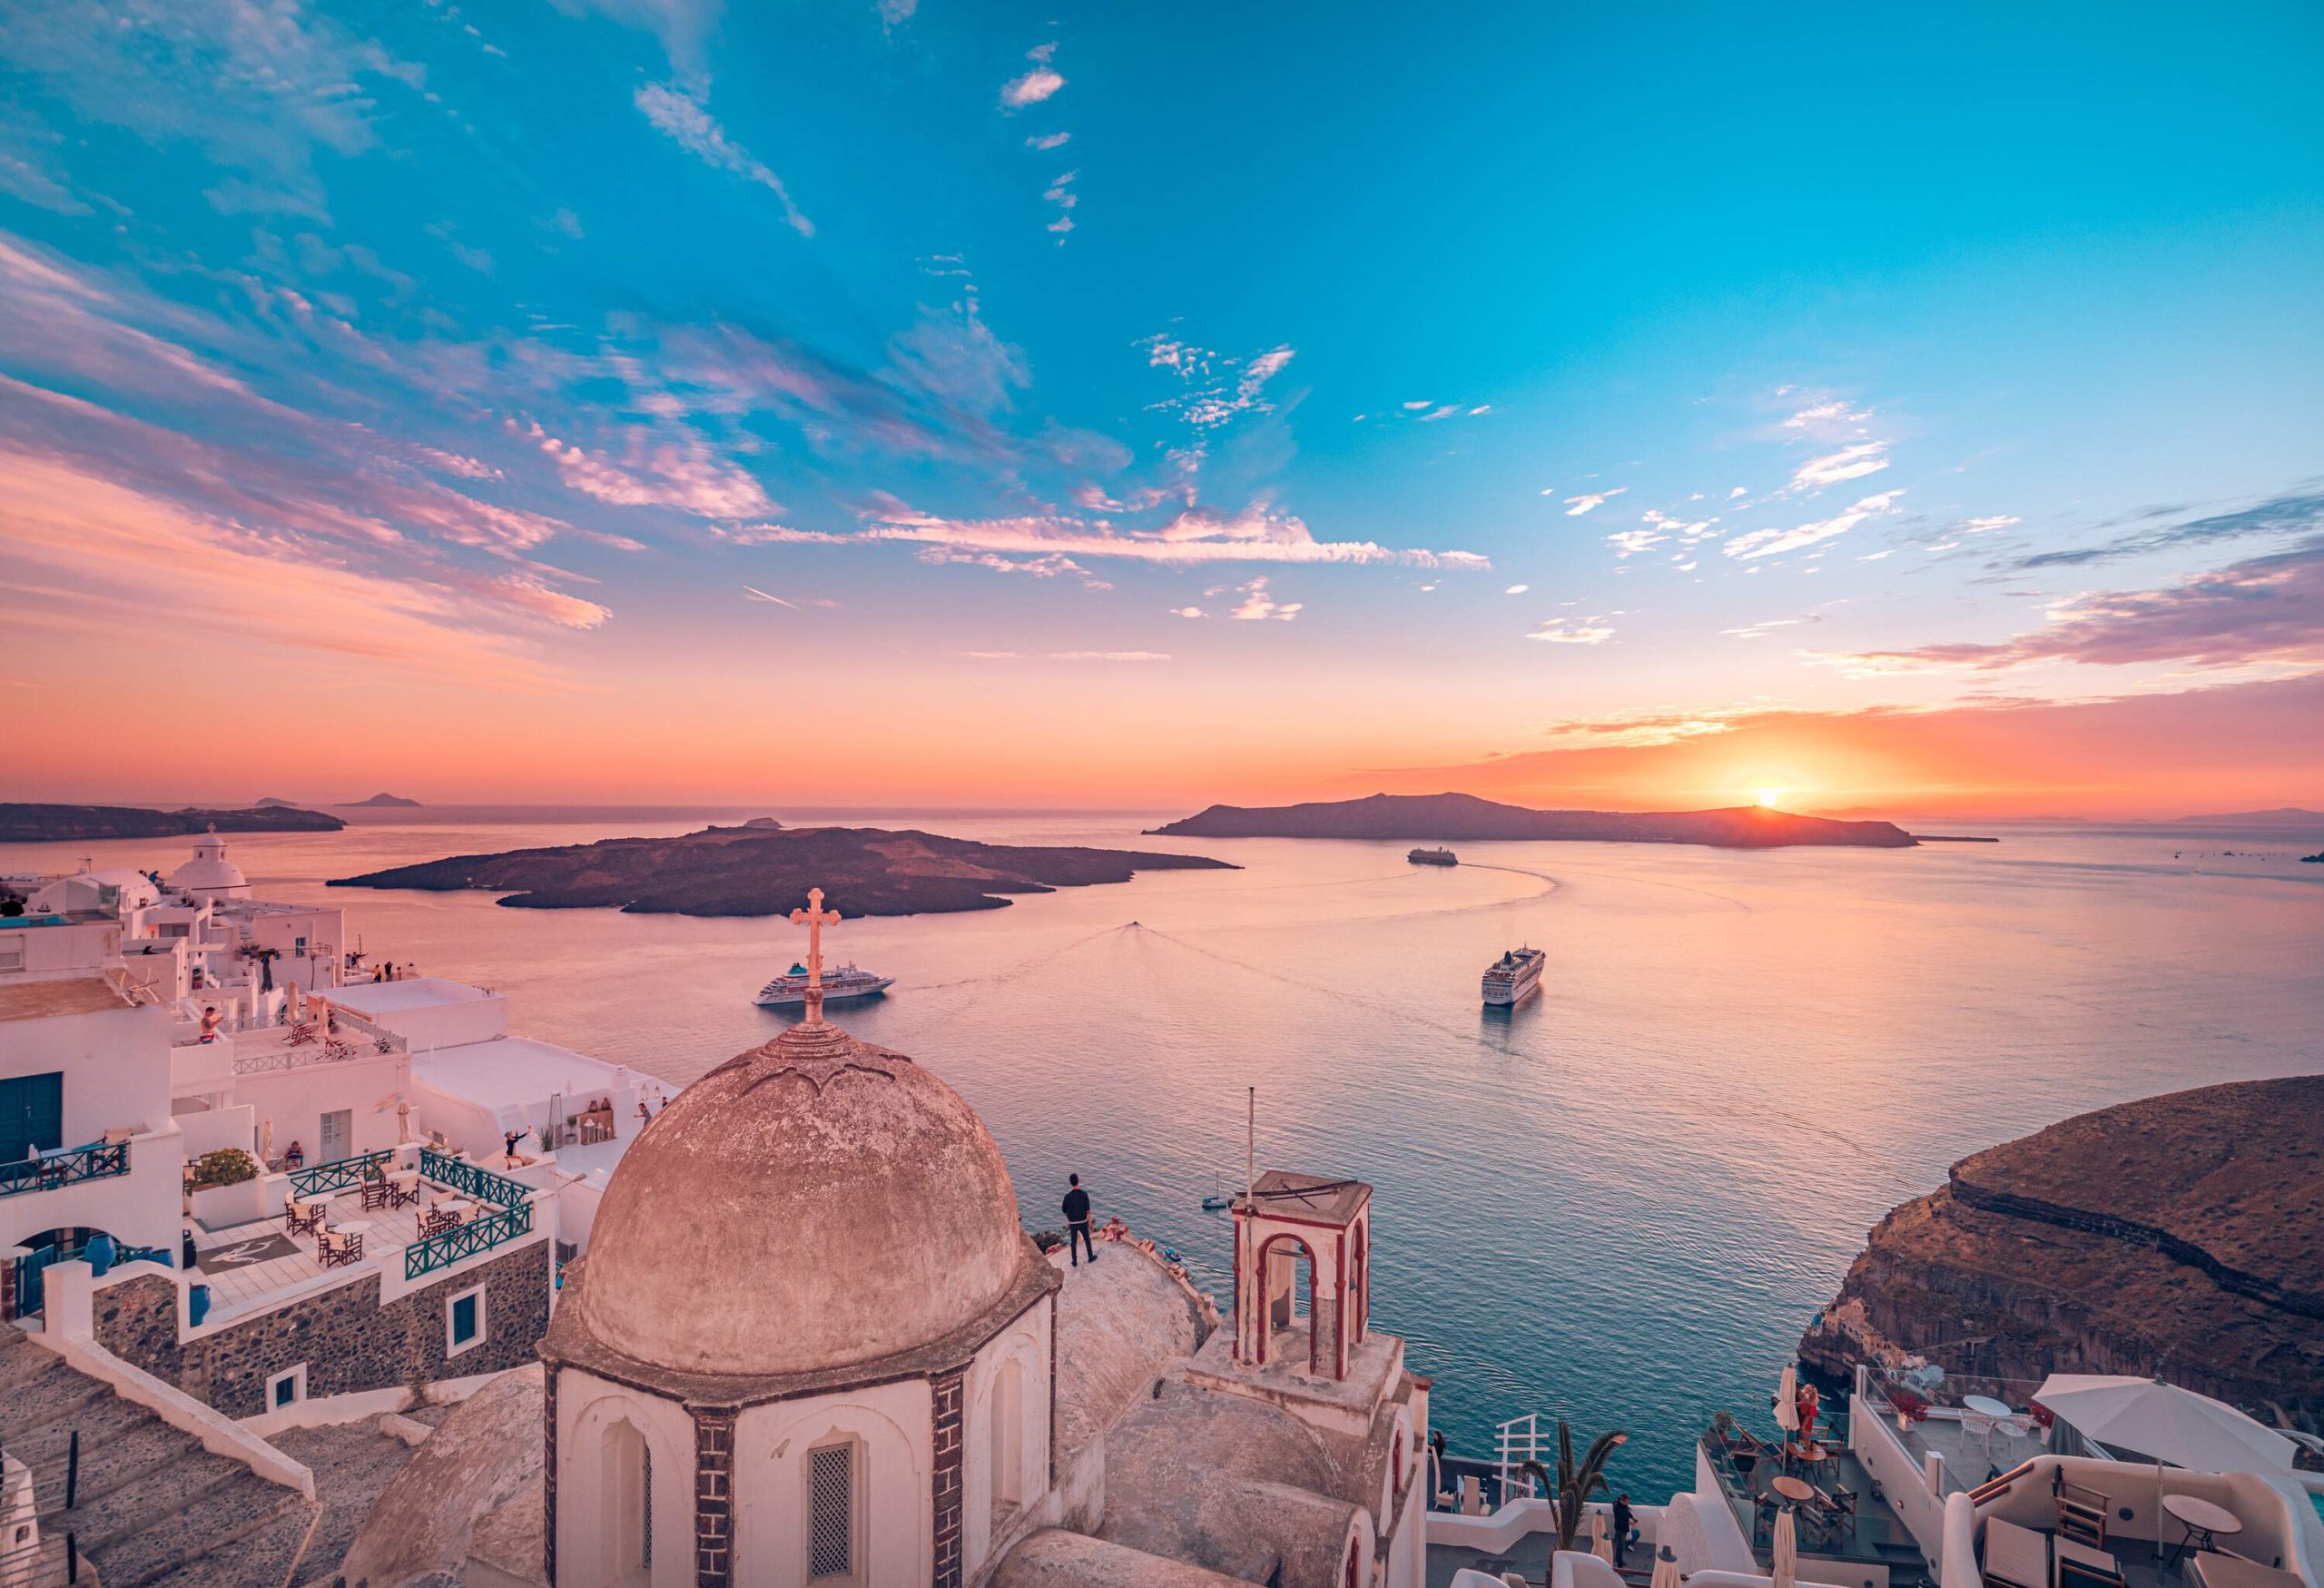 As the sun sets over the bay, the dramatic cloudy sky provides a stunning backdrop to a row of charming white stone houses and a dome-topped building, while majestic cruise ships bask in the warm glow.